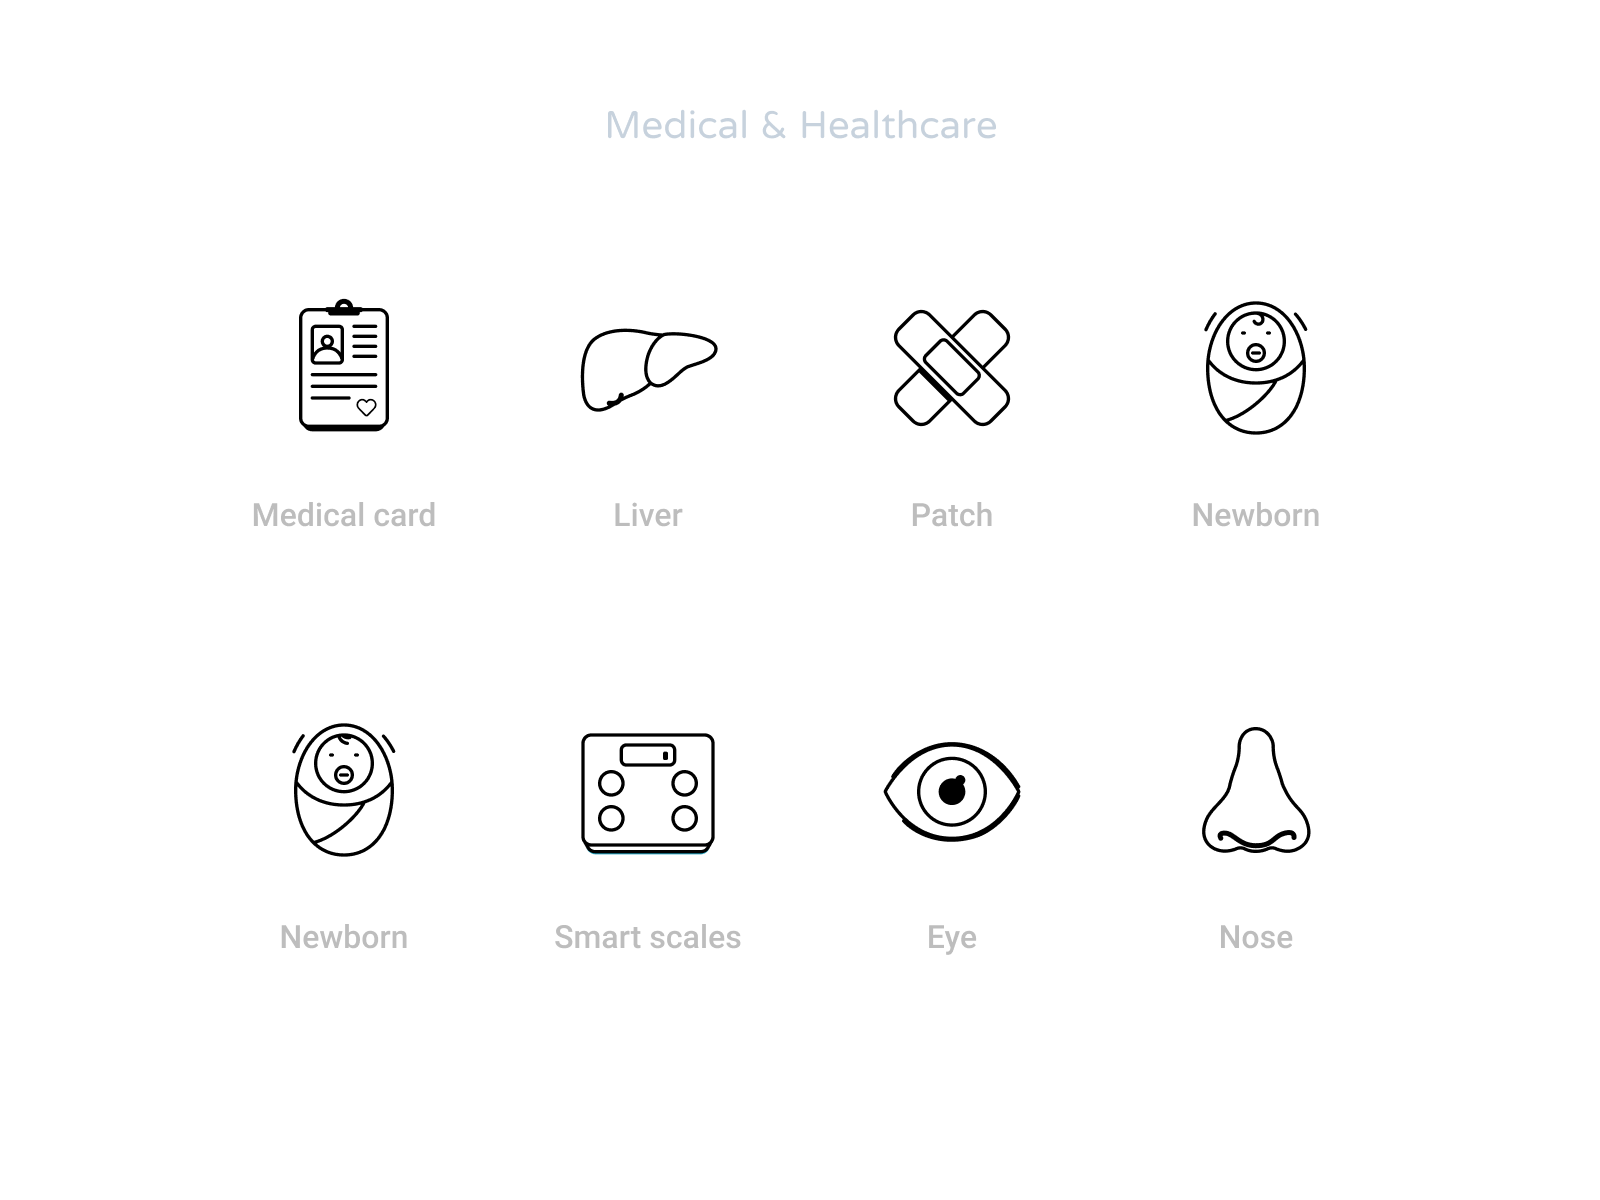 Medical And Healthcare Icons Set By Rengised On Dribbble 6793